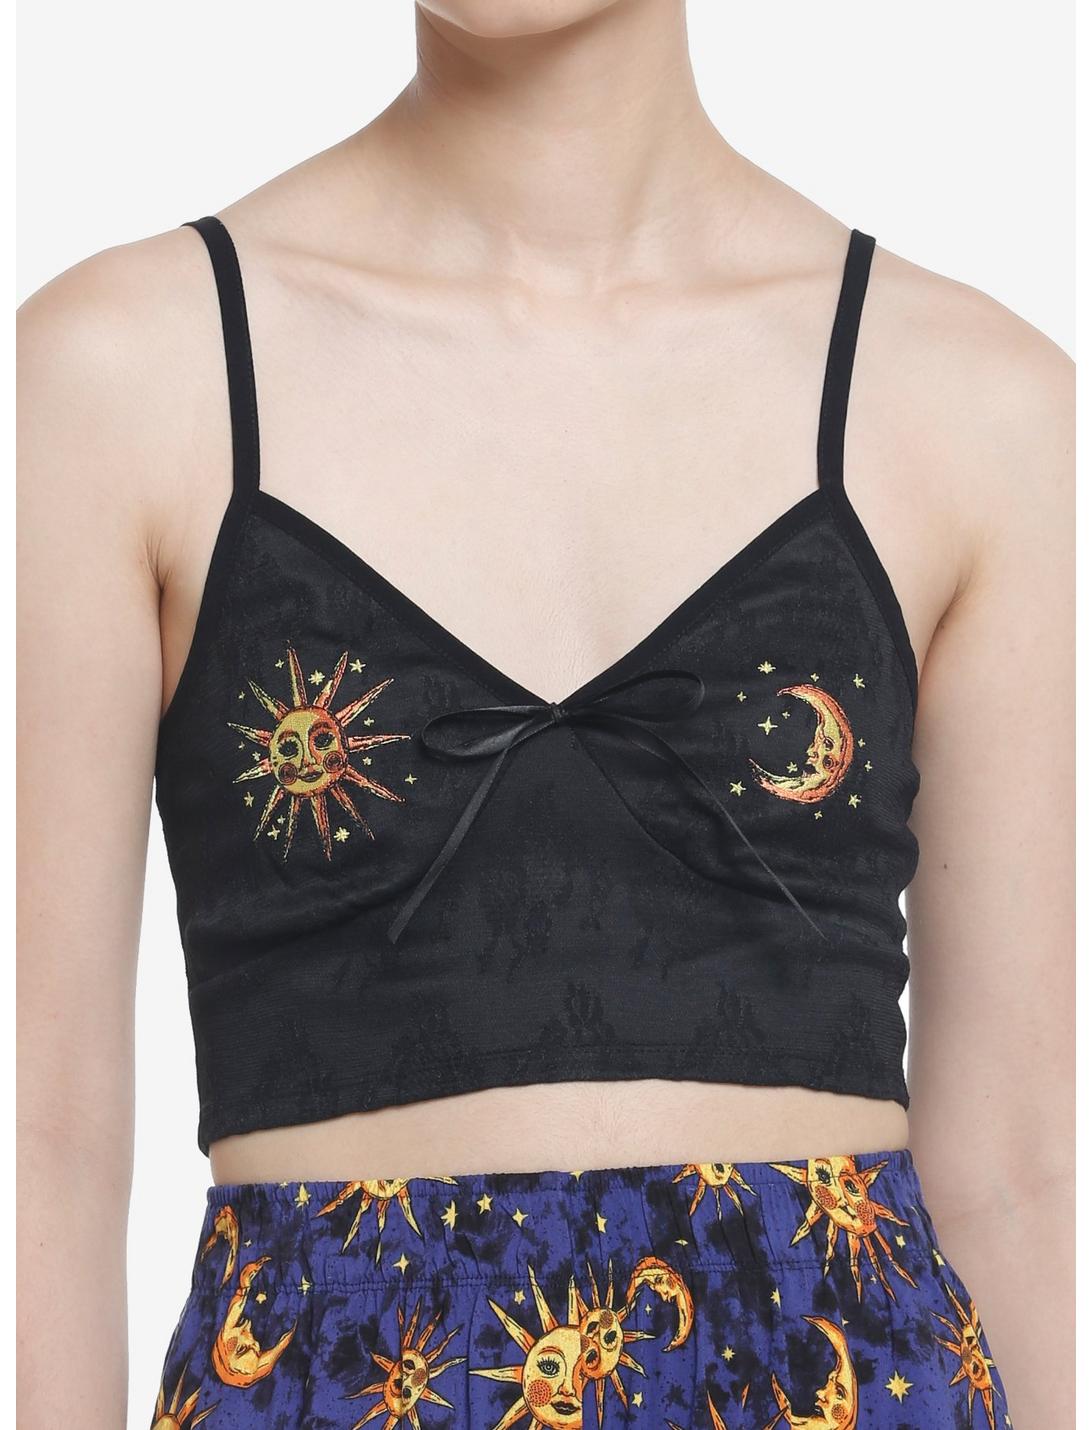 Cosmic Aura Celestial Embroidered Lace Girls Tank Top, MULTI, hi-res